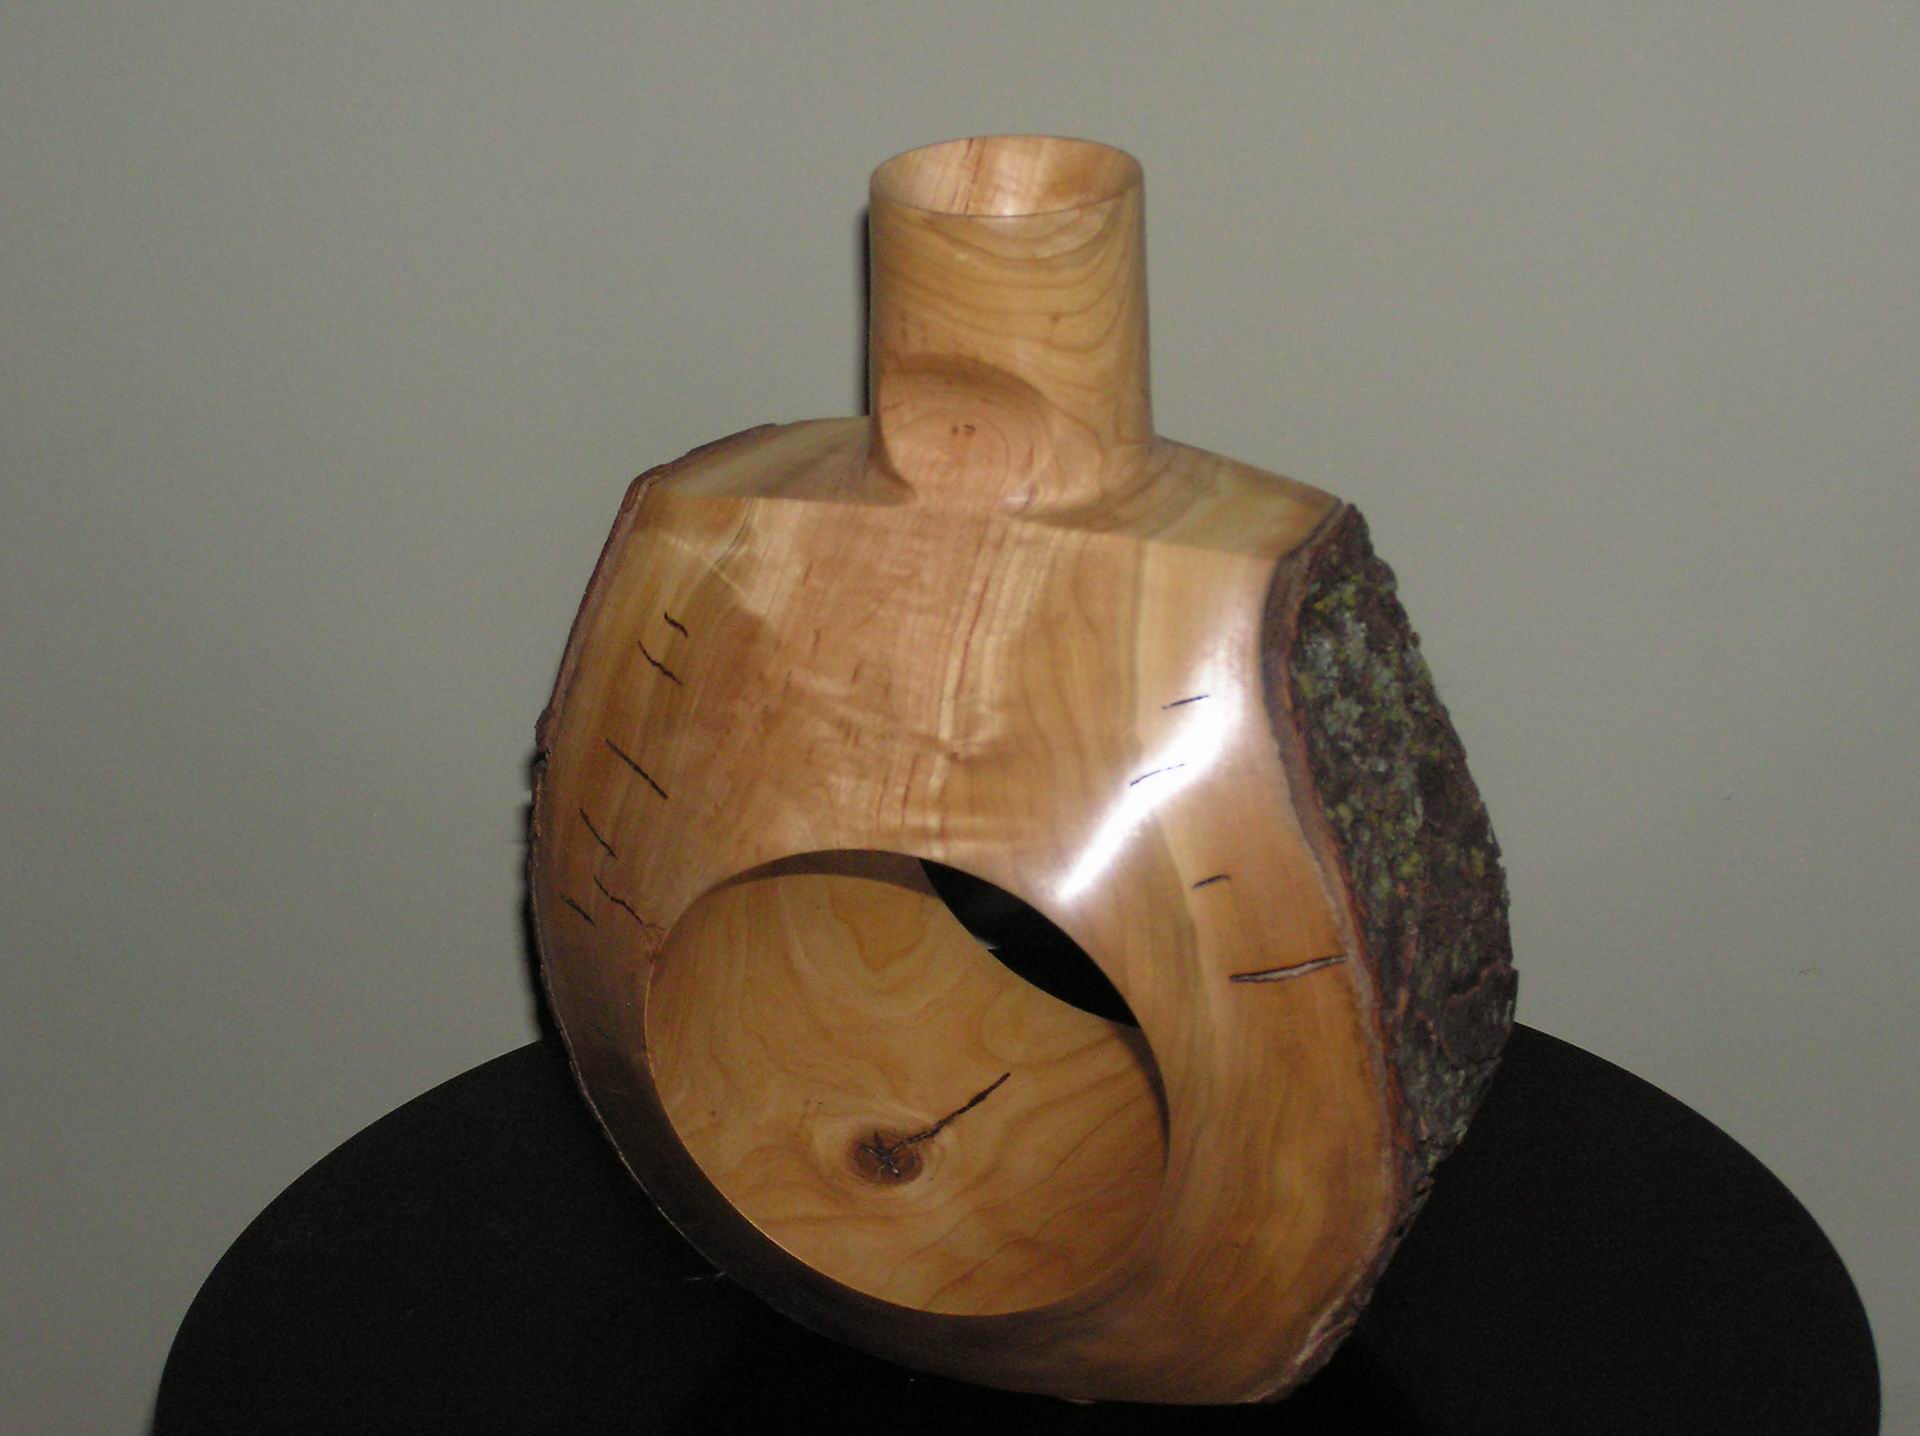 A two axis vase in cherry with a natural edge